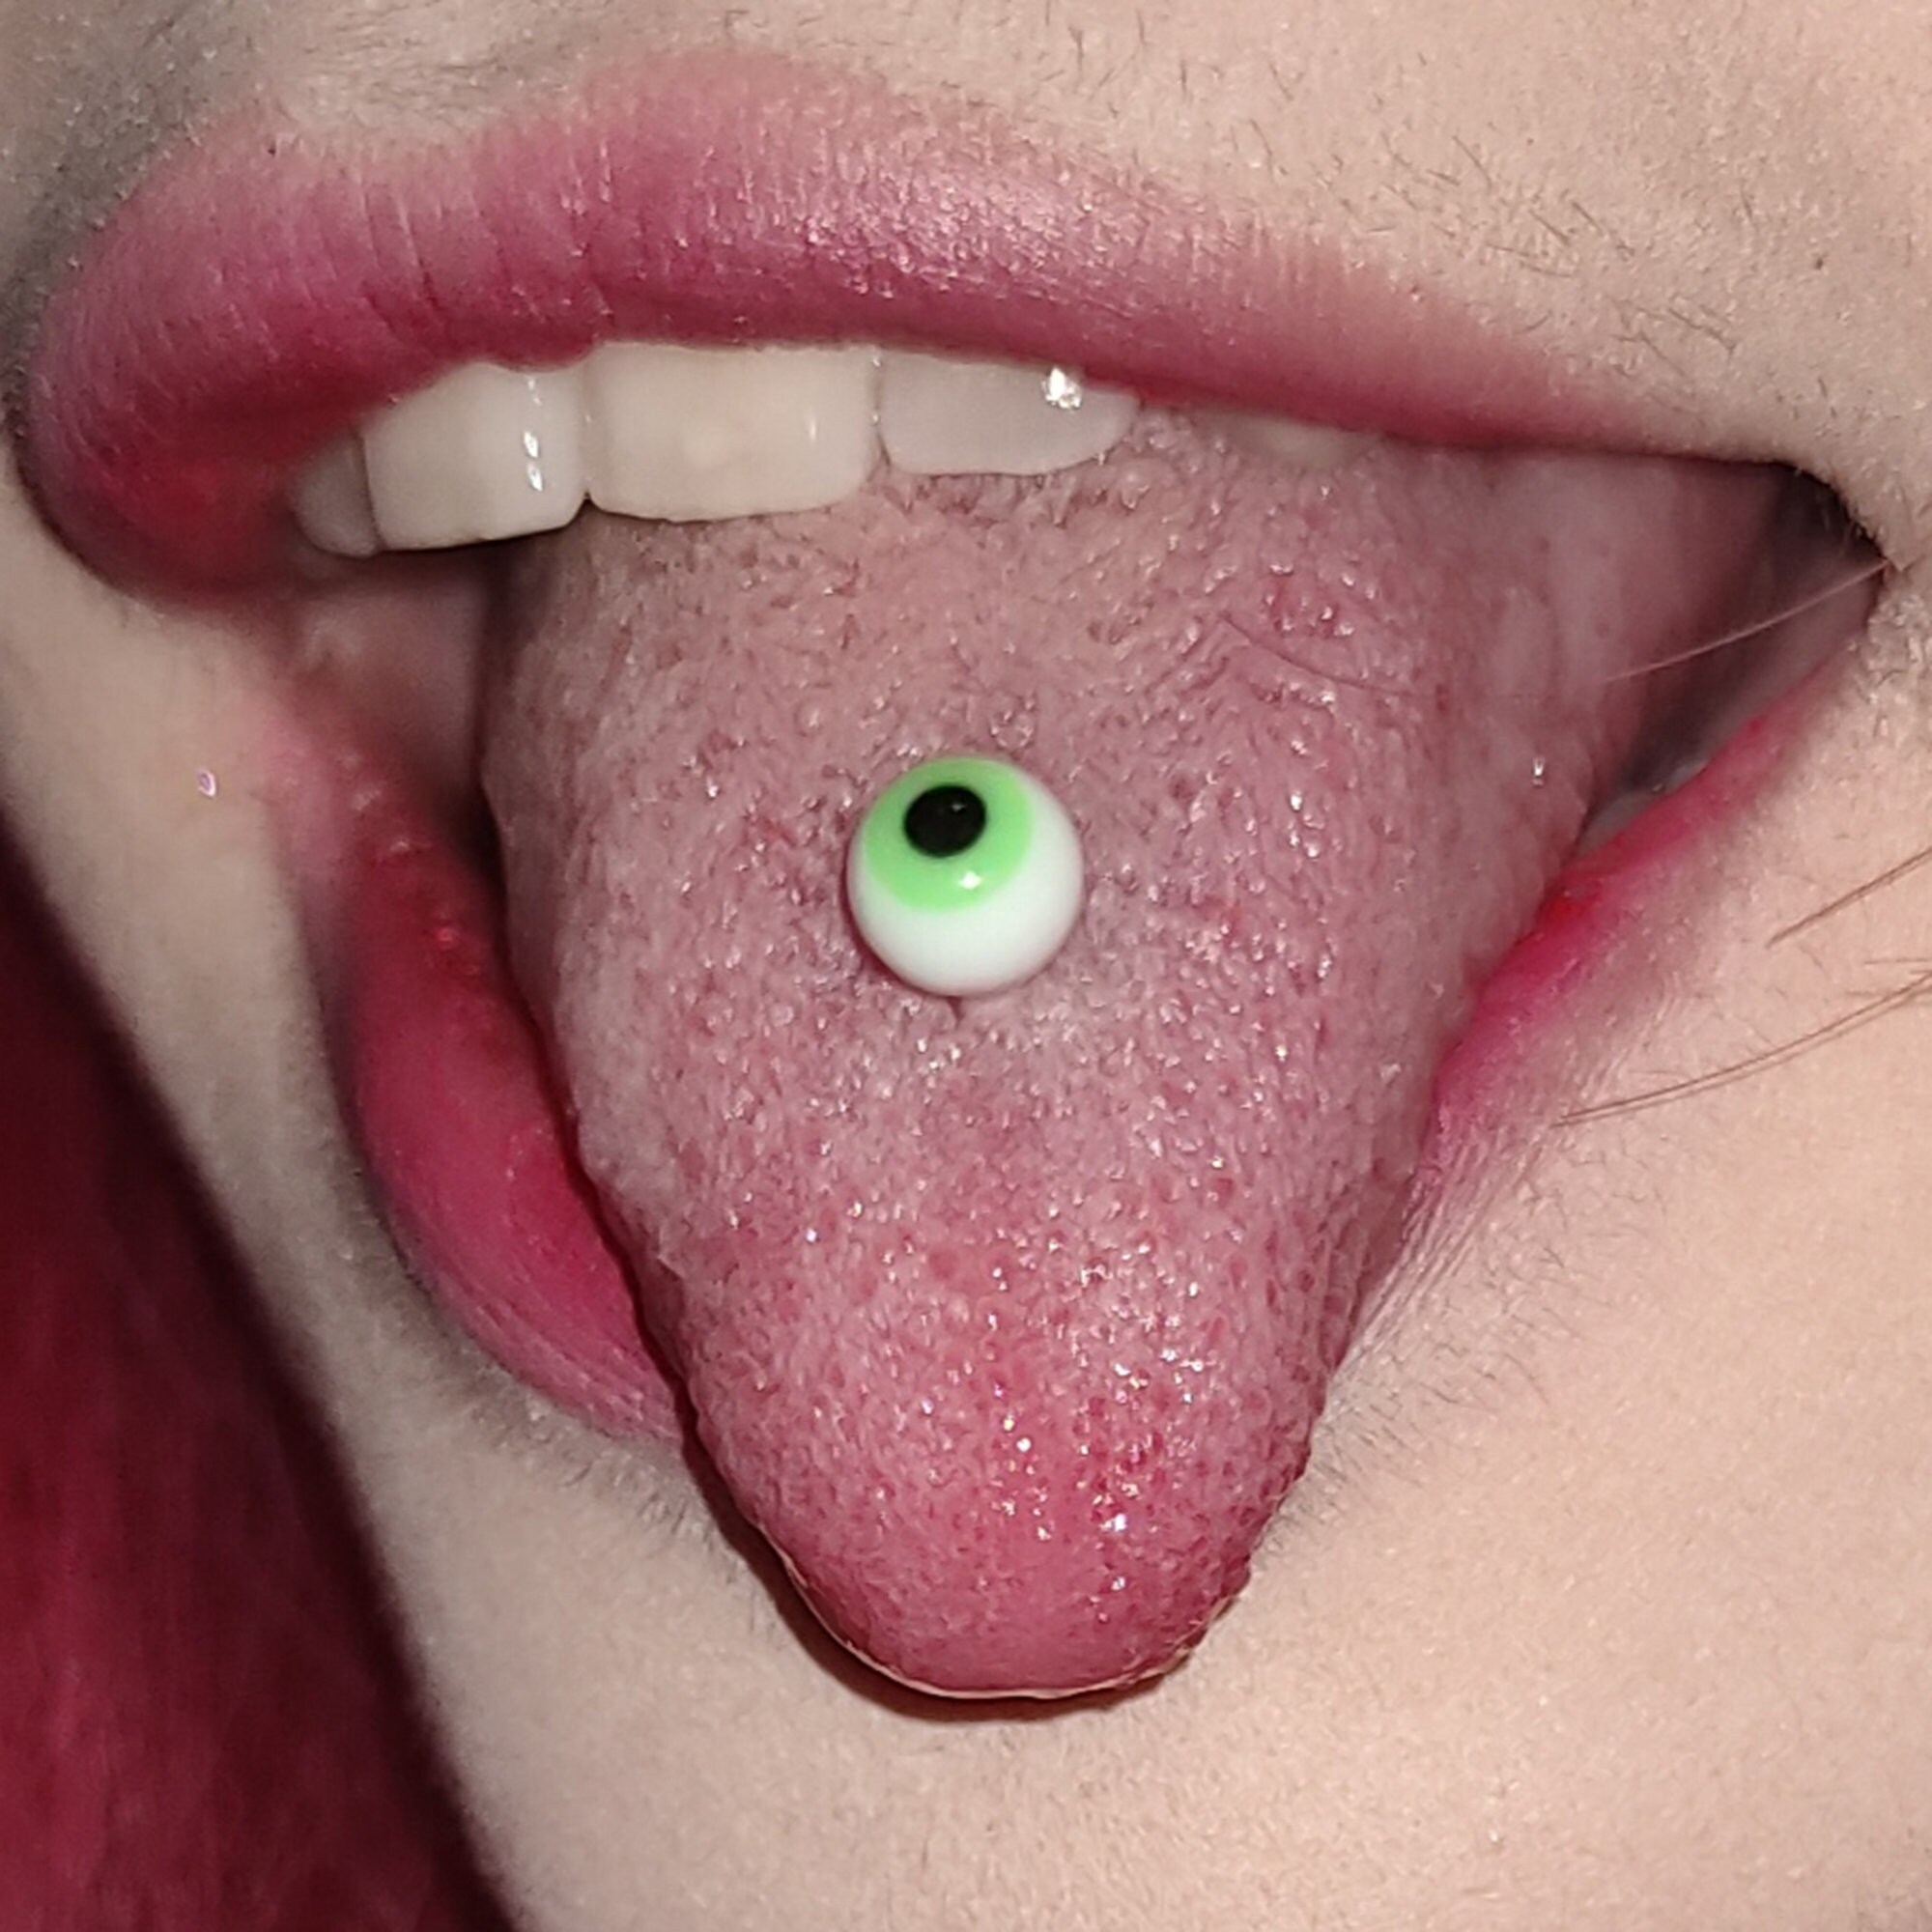 Green tongue: Causes, infections, and treatments